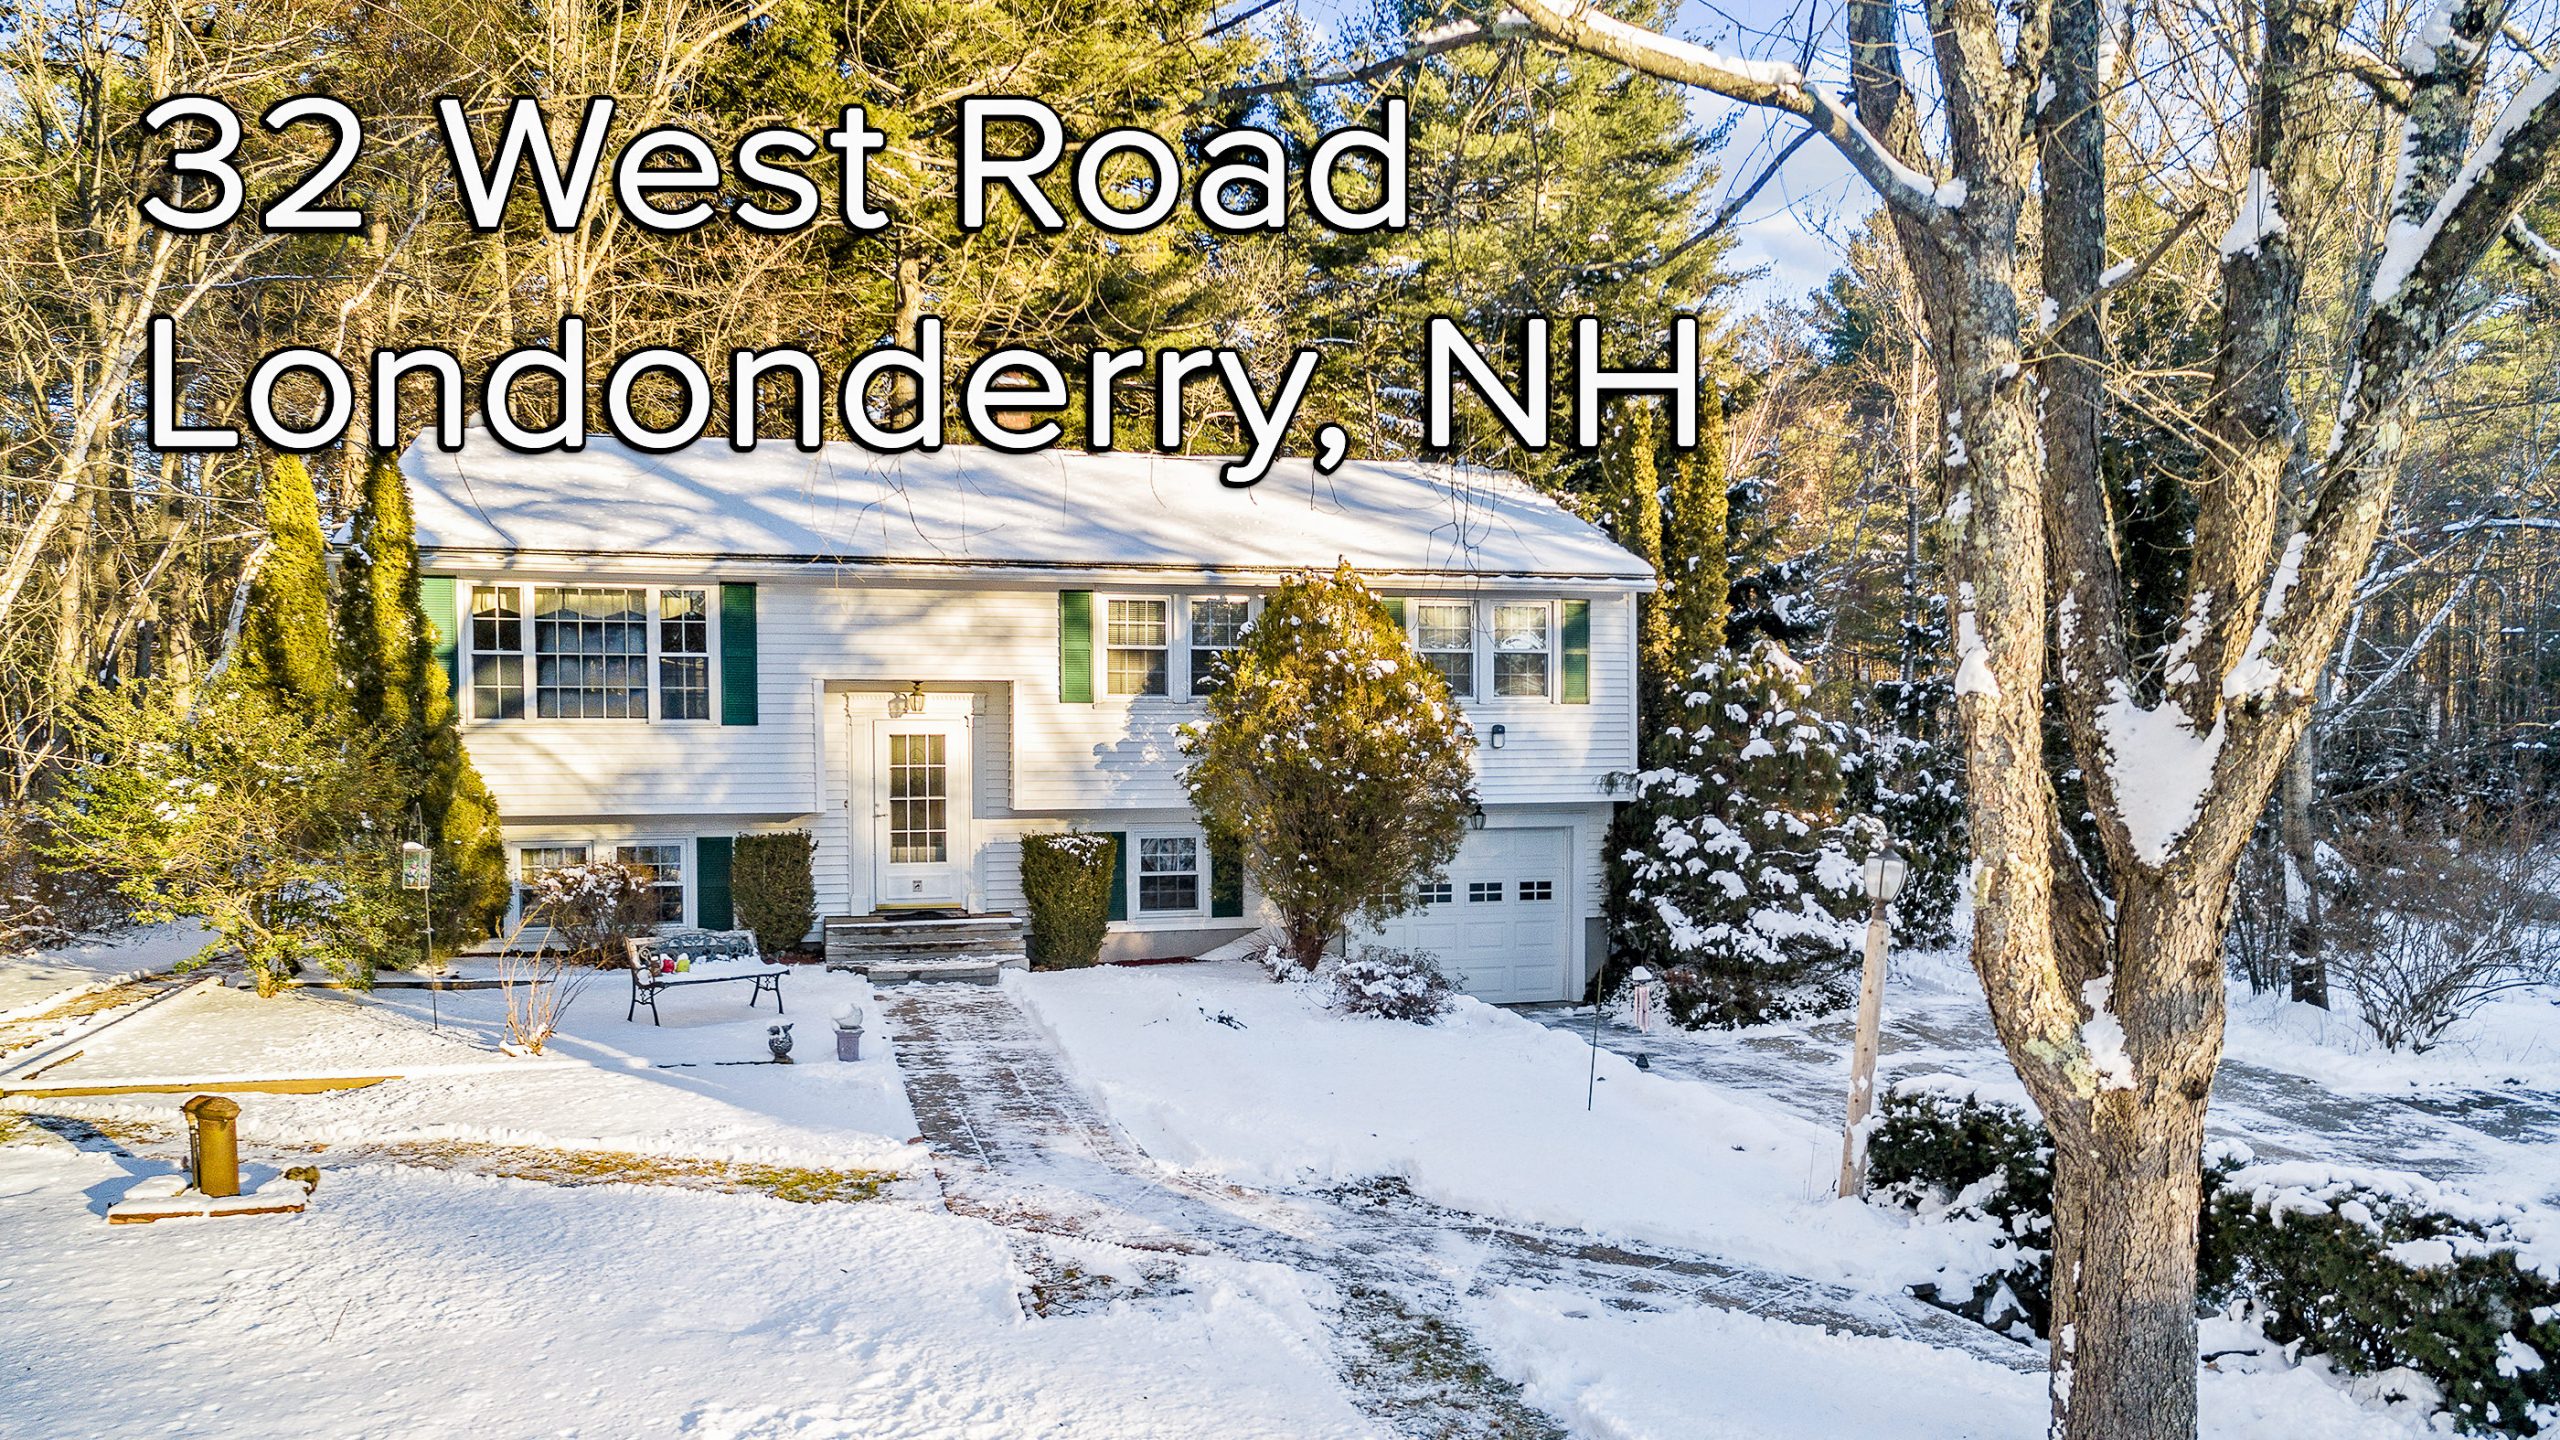 32 West Rd Londonderry NH 03053